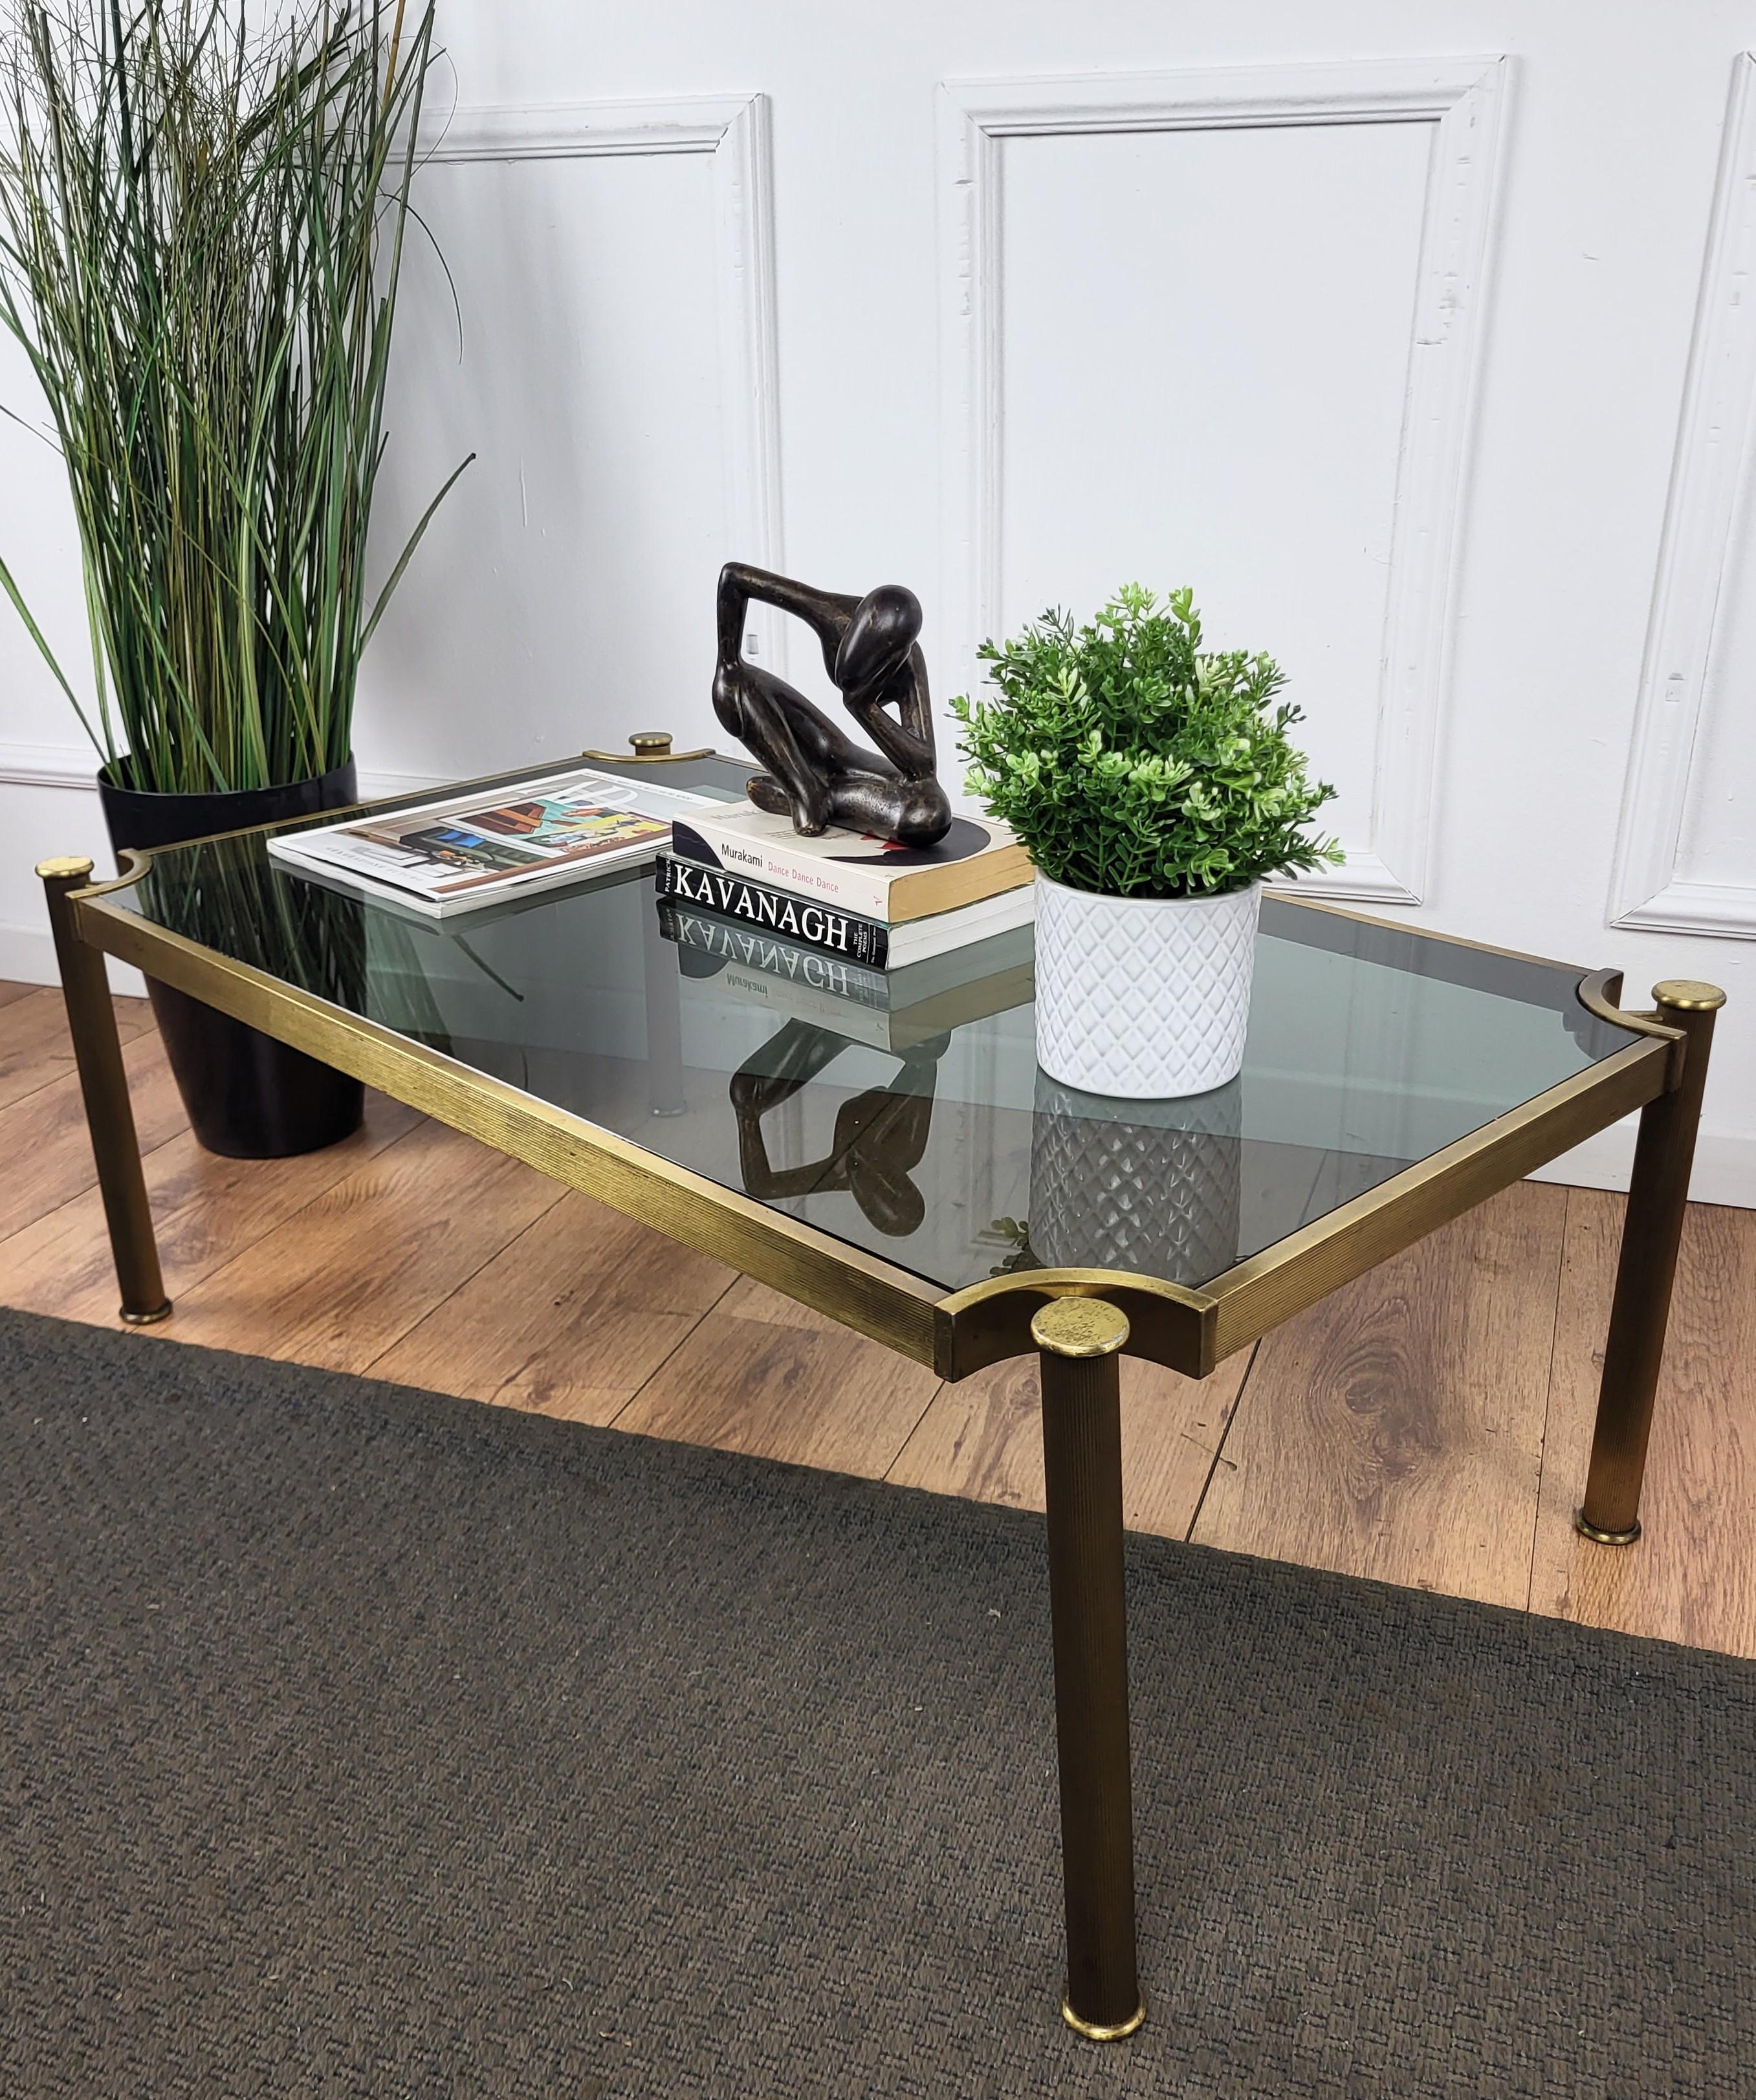 1980s Italian Mid-Century Regency Neoclassical Brass Smoked Glass Coffee Table In Good Condition For Sale In Carimate, Como